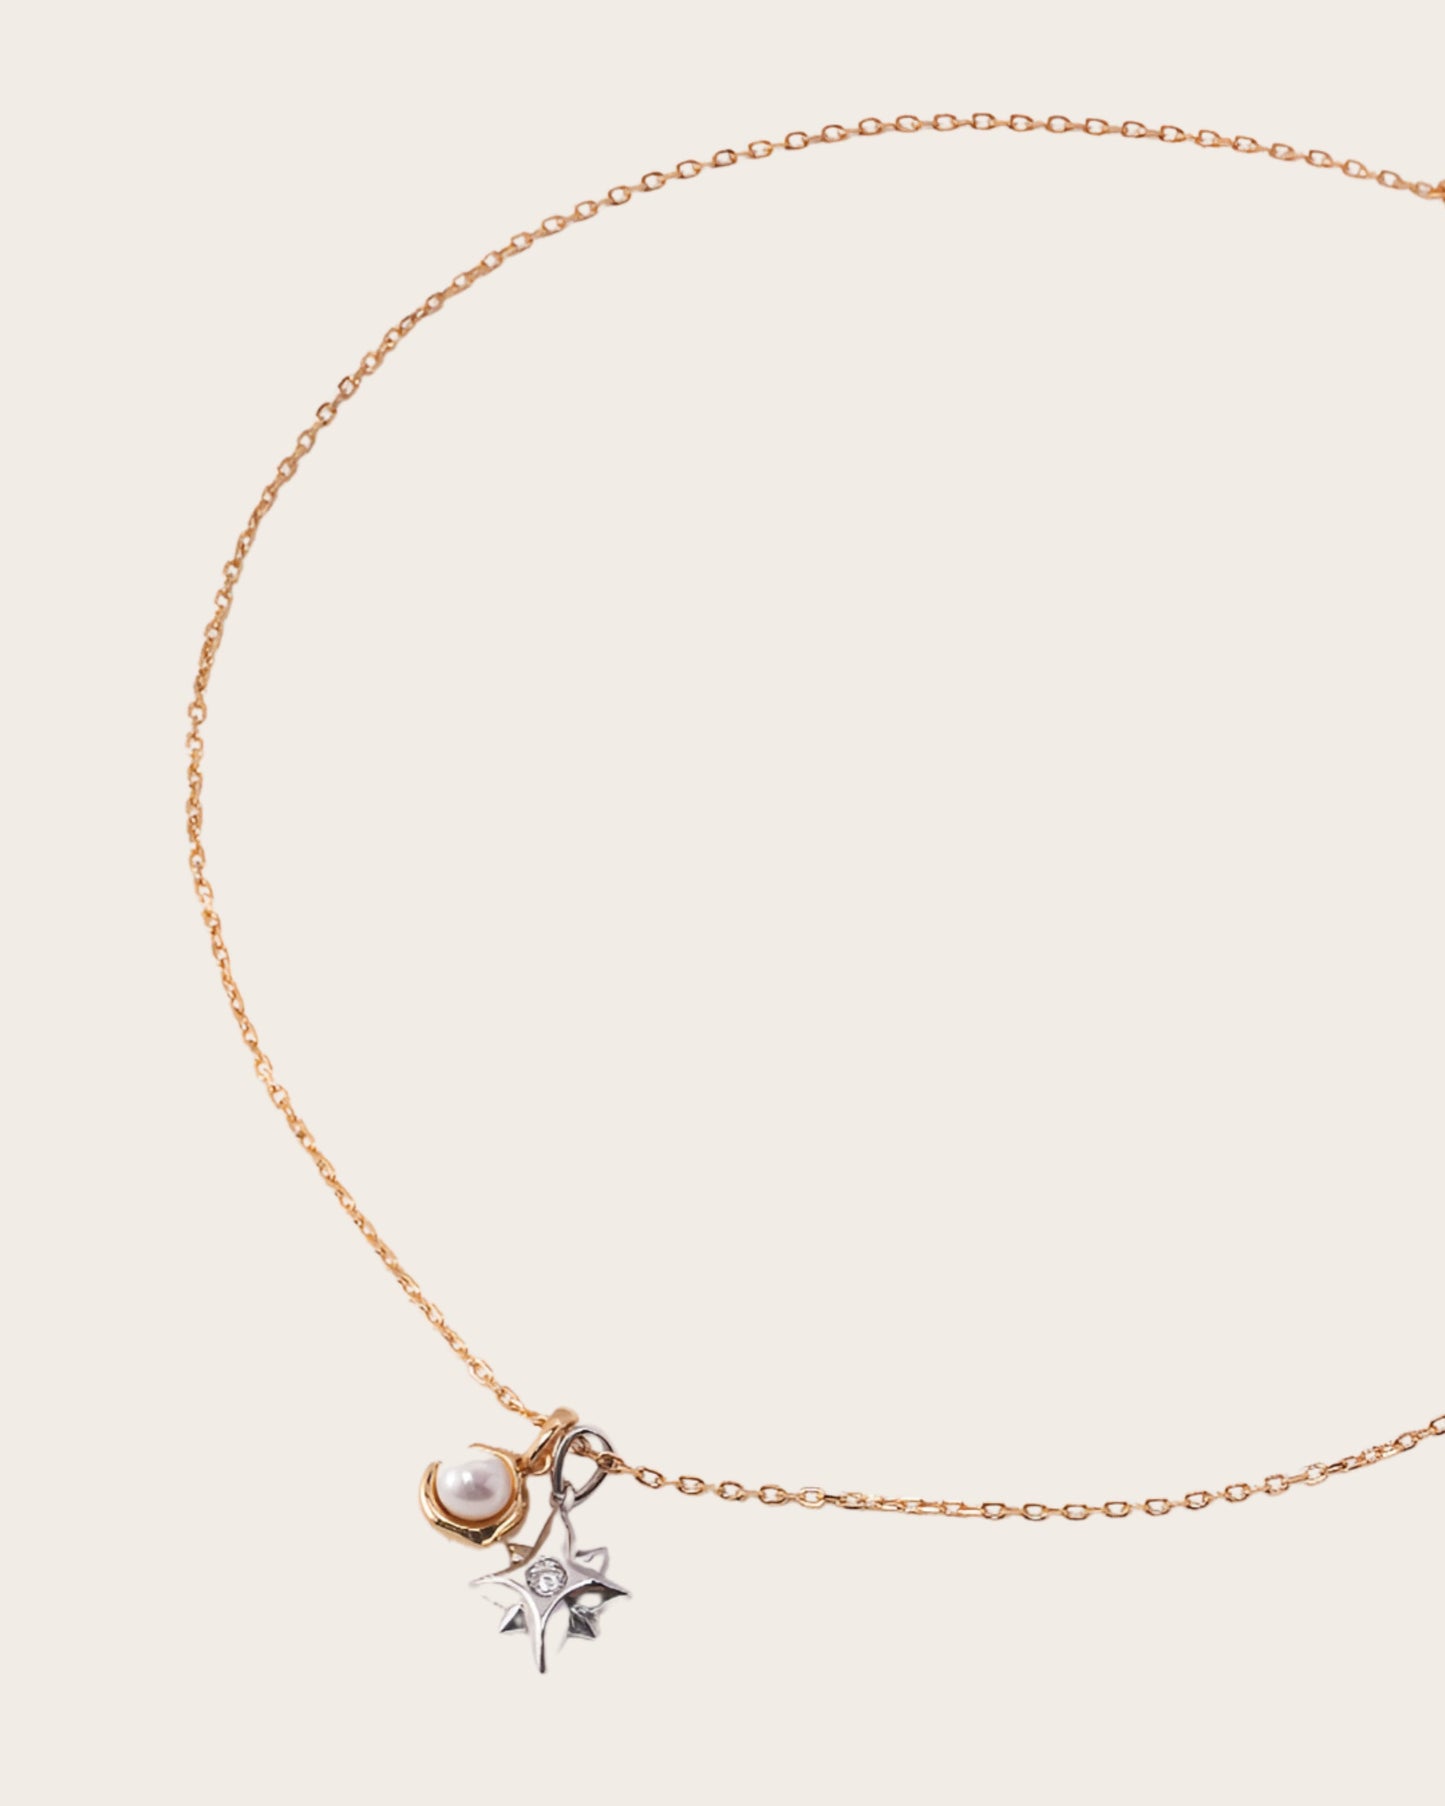 Moon and Star Exquisite Necklace - S925 Sterling Silver with 18K Gold Vermeil  and Zircon- Pearl Luminance - Celestial allure  - a celestial masterpiece that will captivate your heart